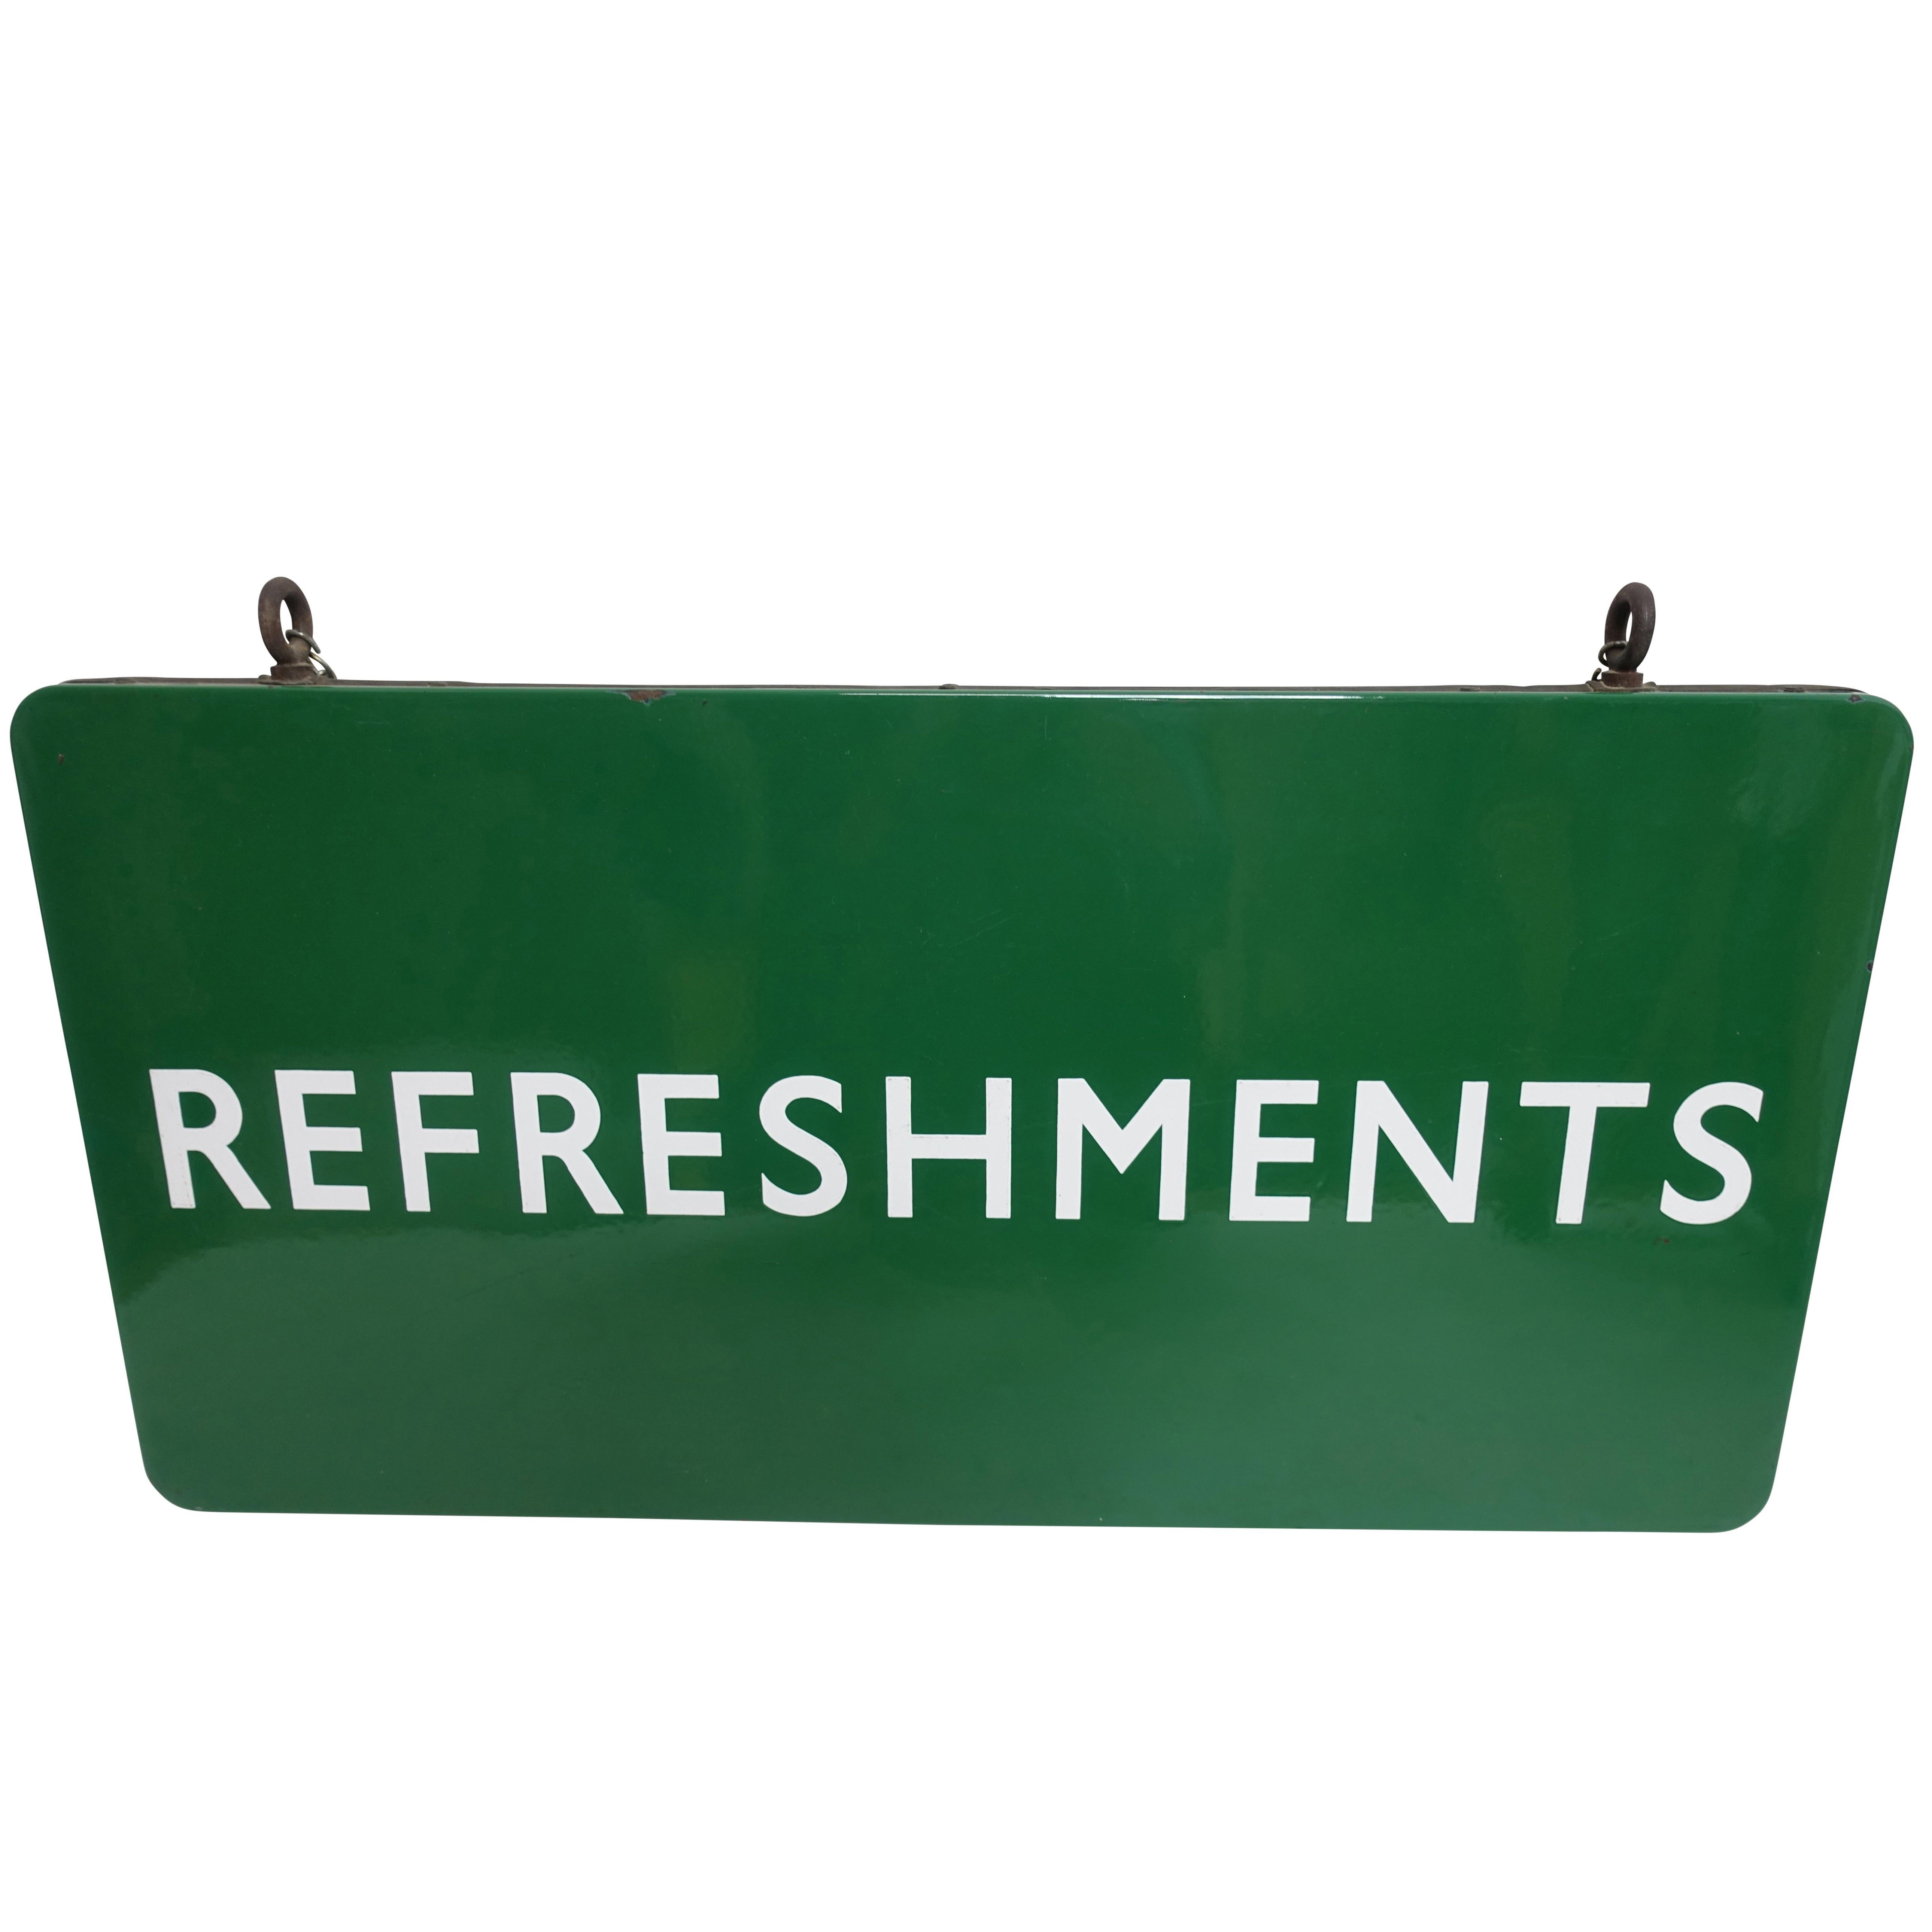 Green Enamel Refreshments Advertising Sign, American, Early to Mid-20th Century